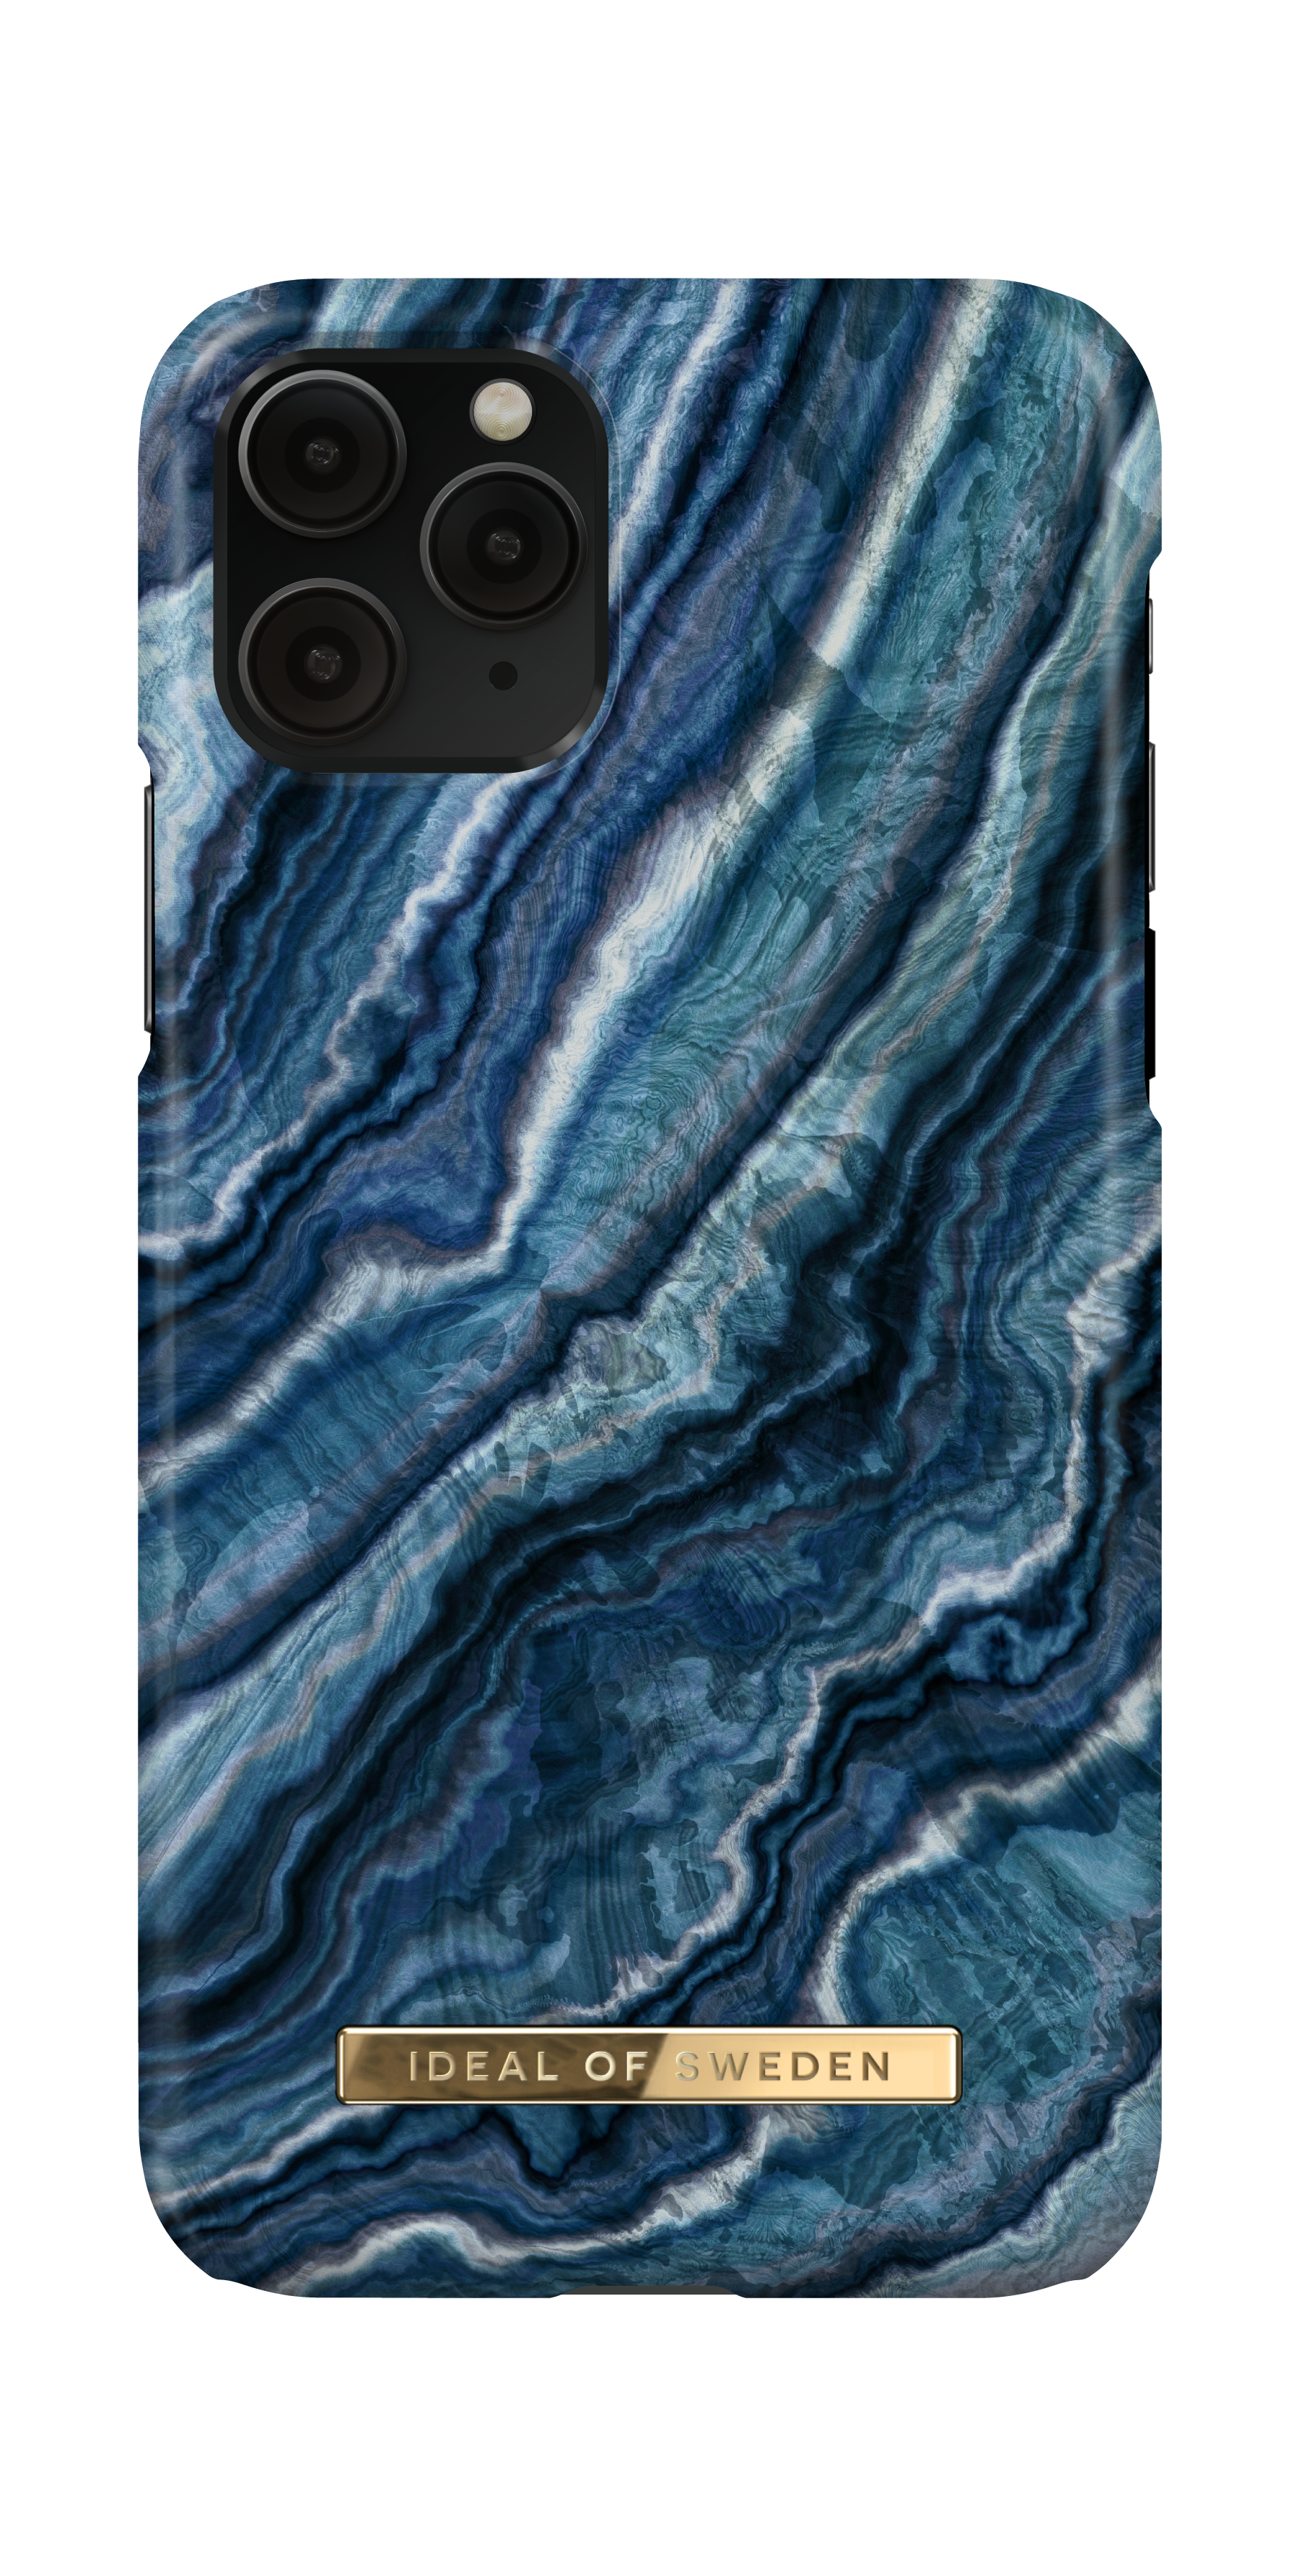 IDEAL OF iPhone iPhone IDFCSS19-I1958-119, Indigo Pro, X, Apple, Swirl Backcover, SWEDEN iPhone XS, 11